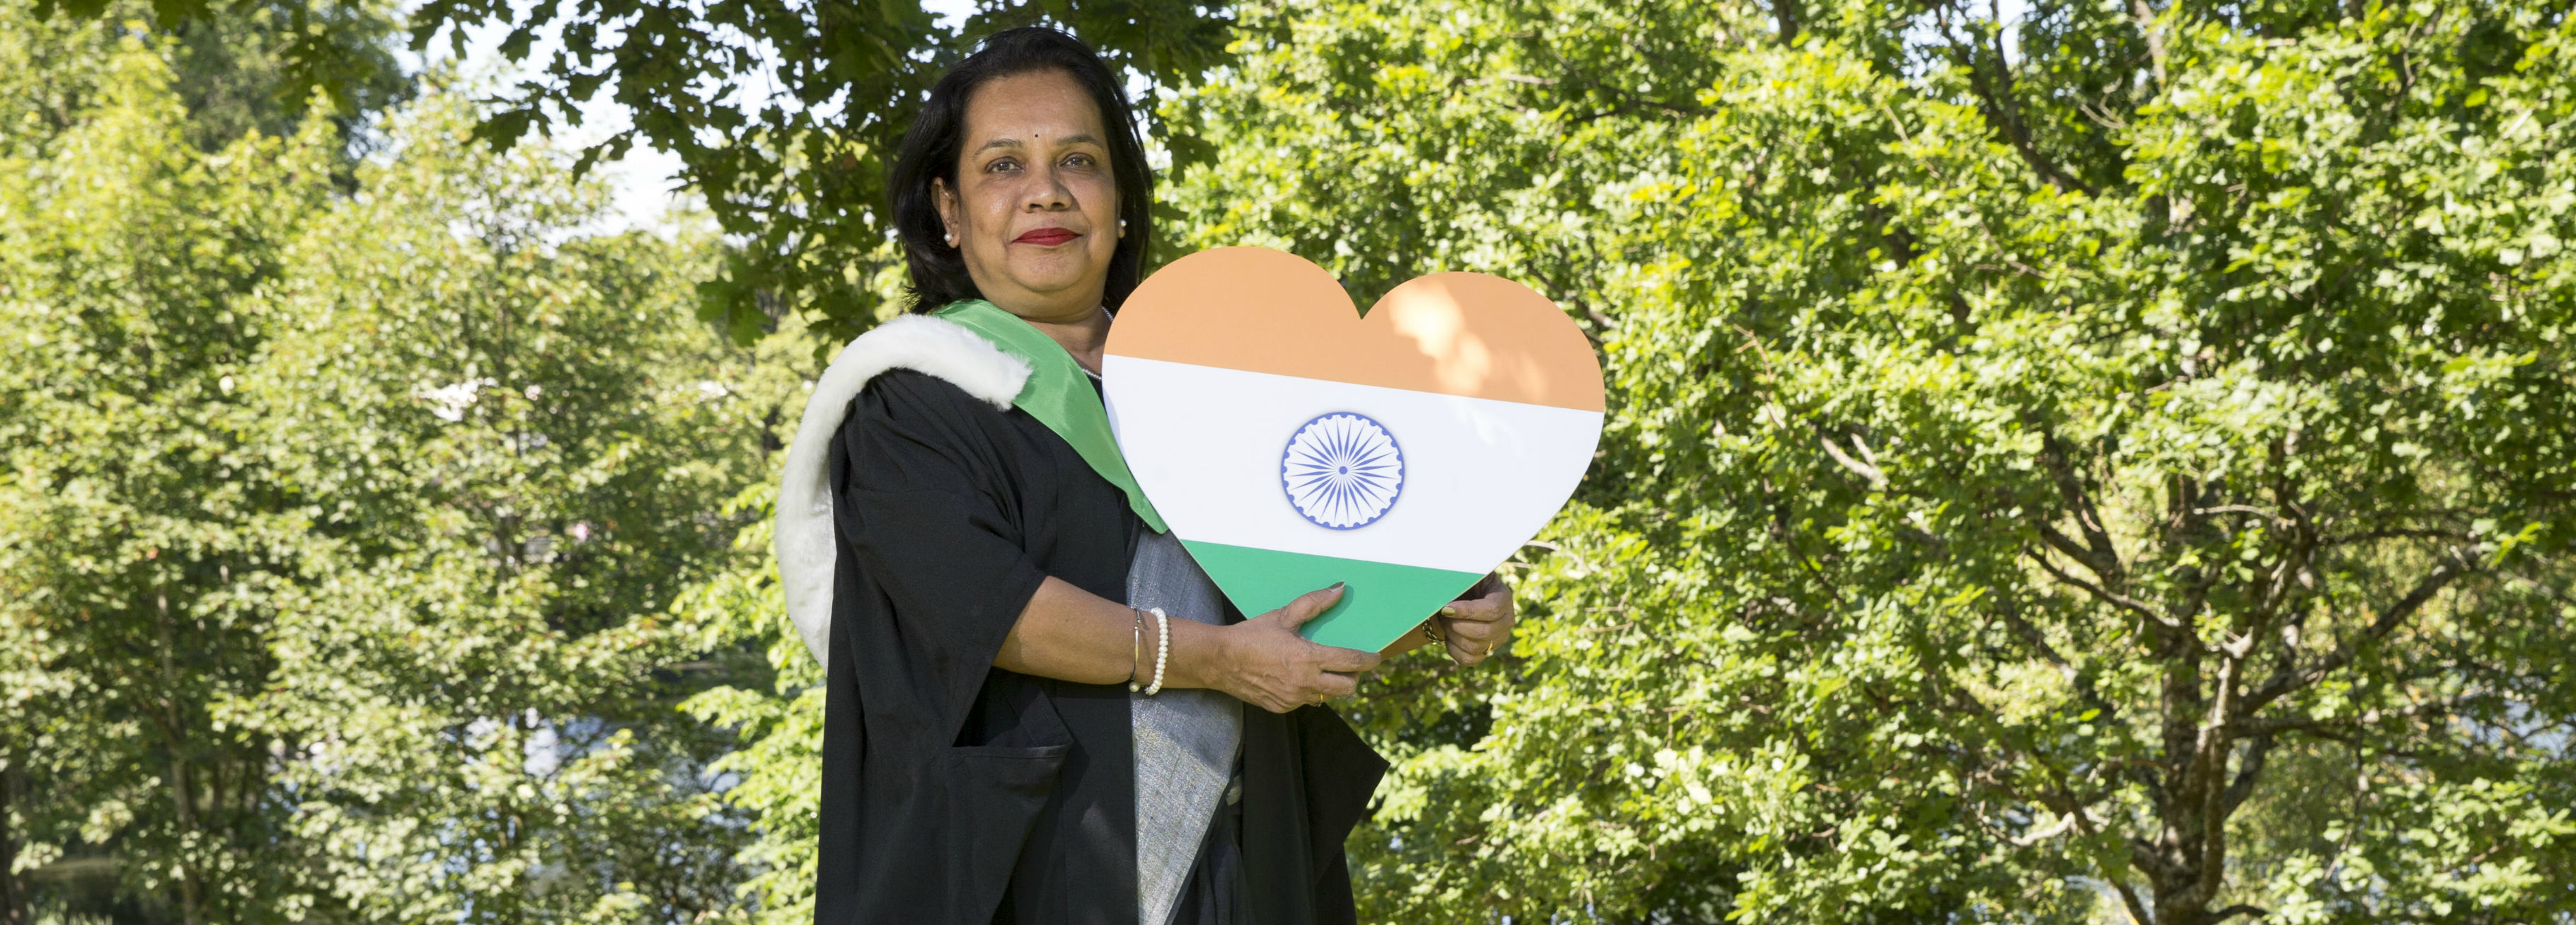 Anupama holding a placard with India flag colours